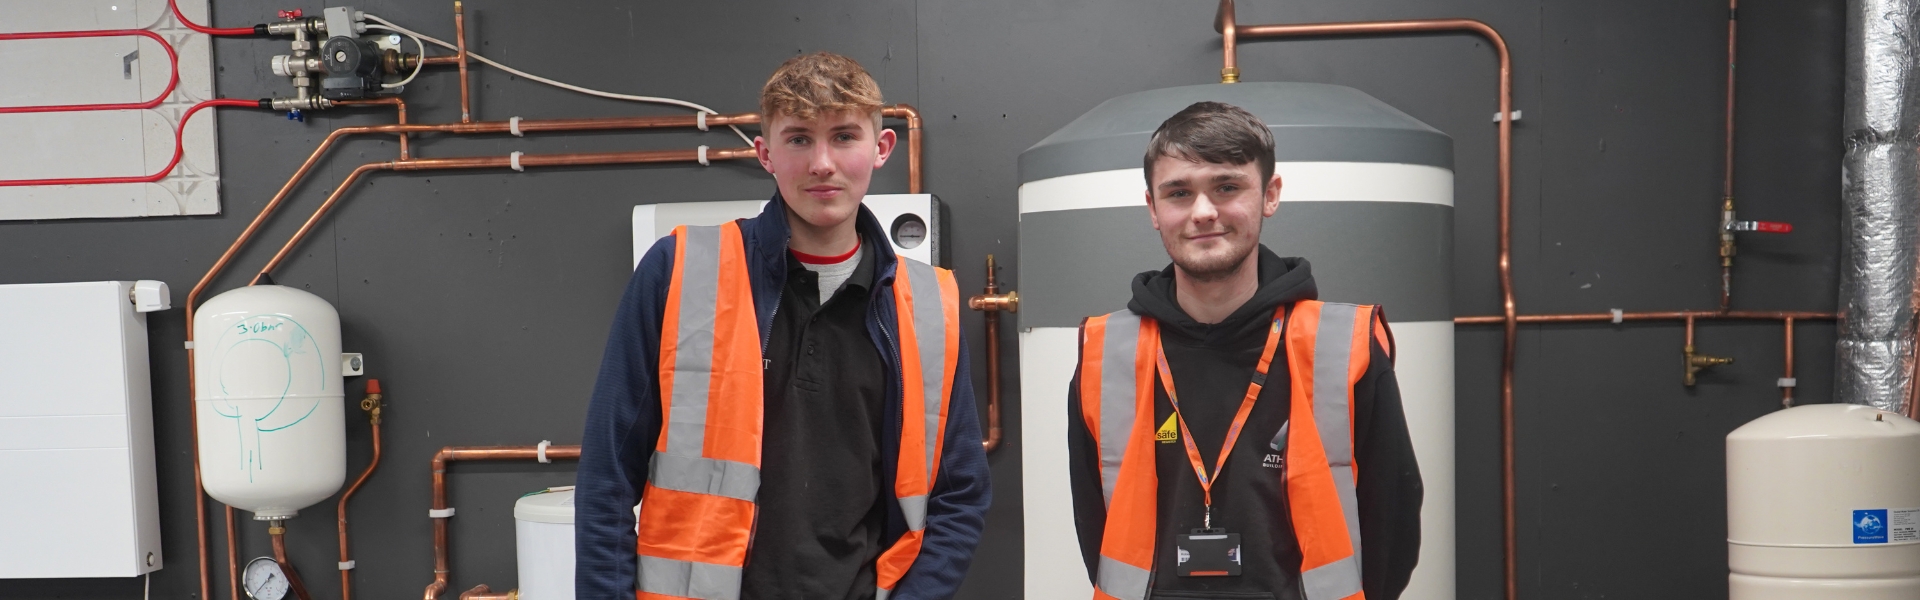 Two Wirral Met apprentices standing together inside work environment